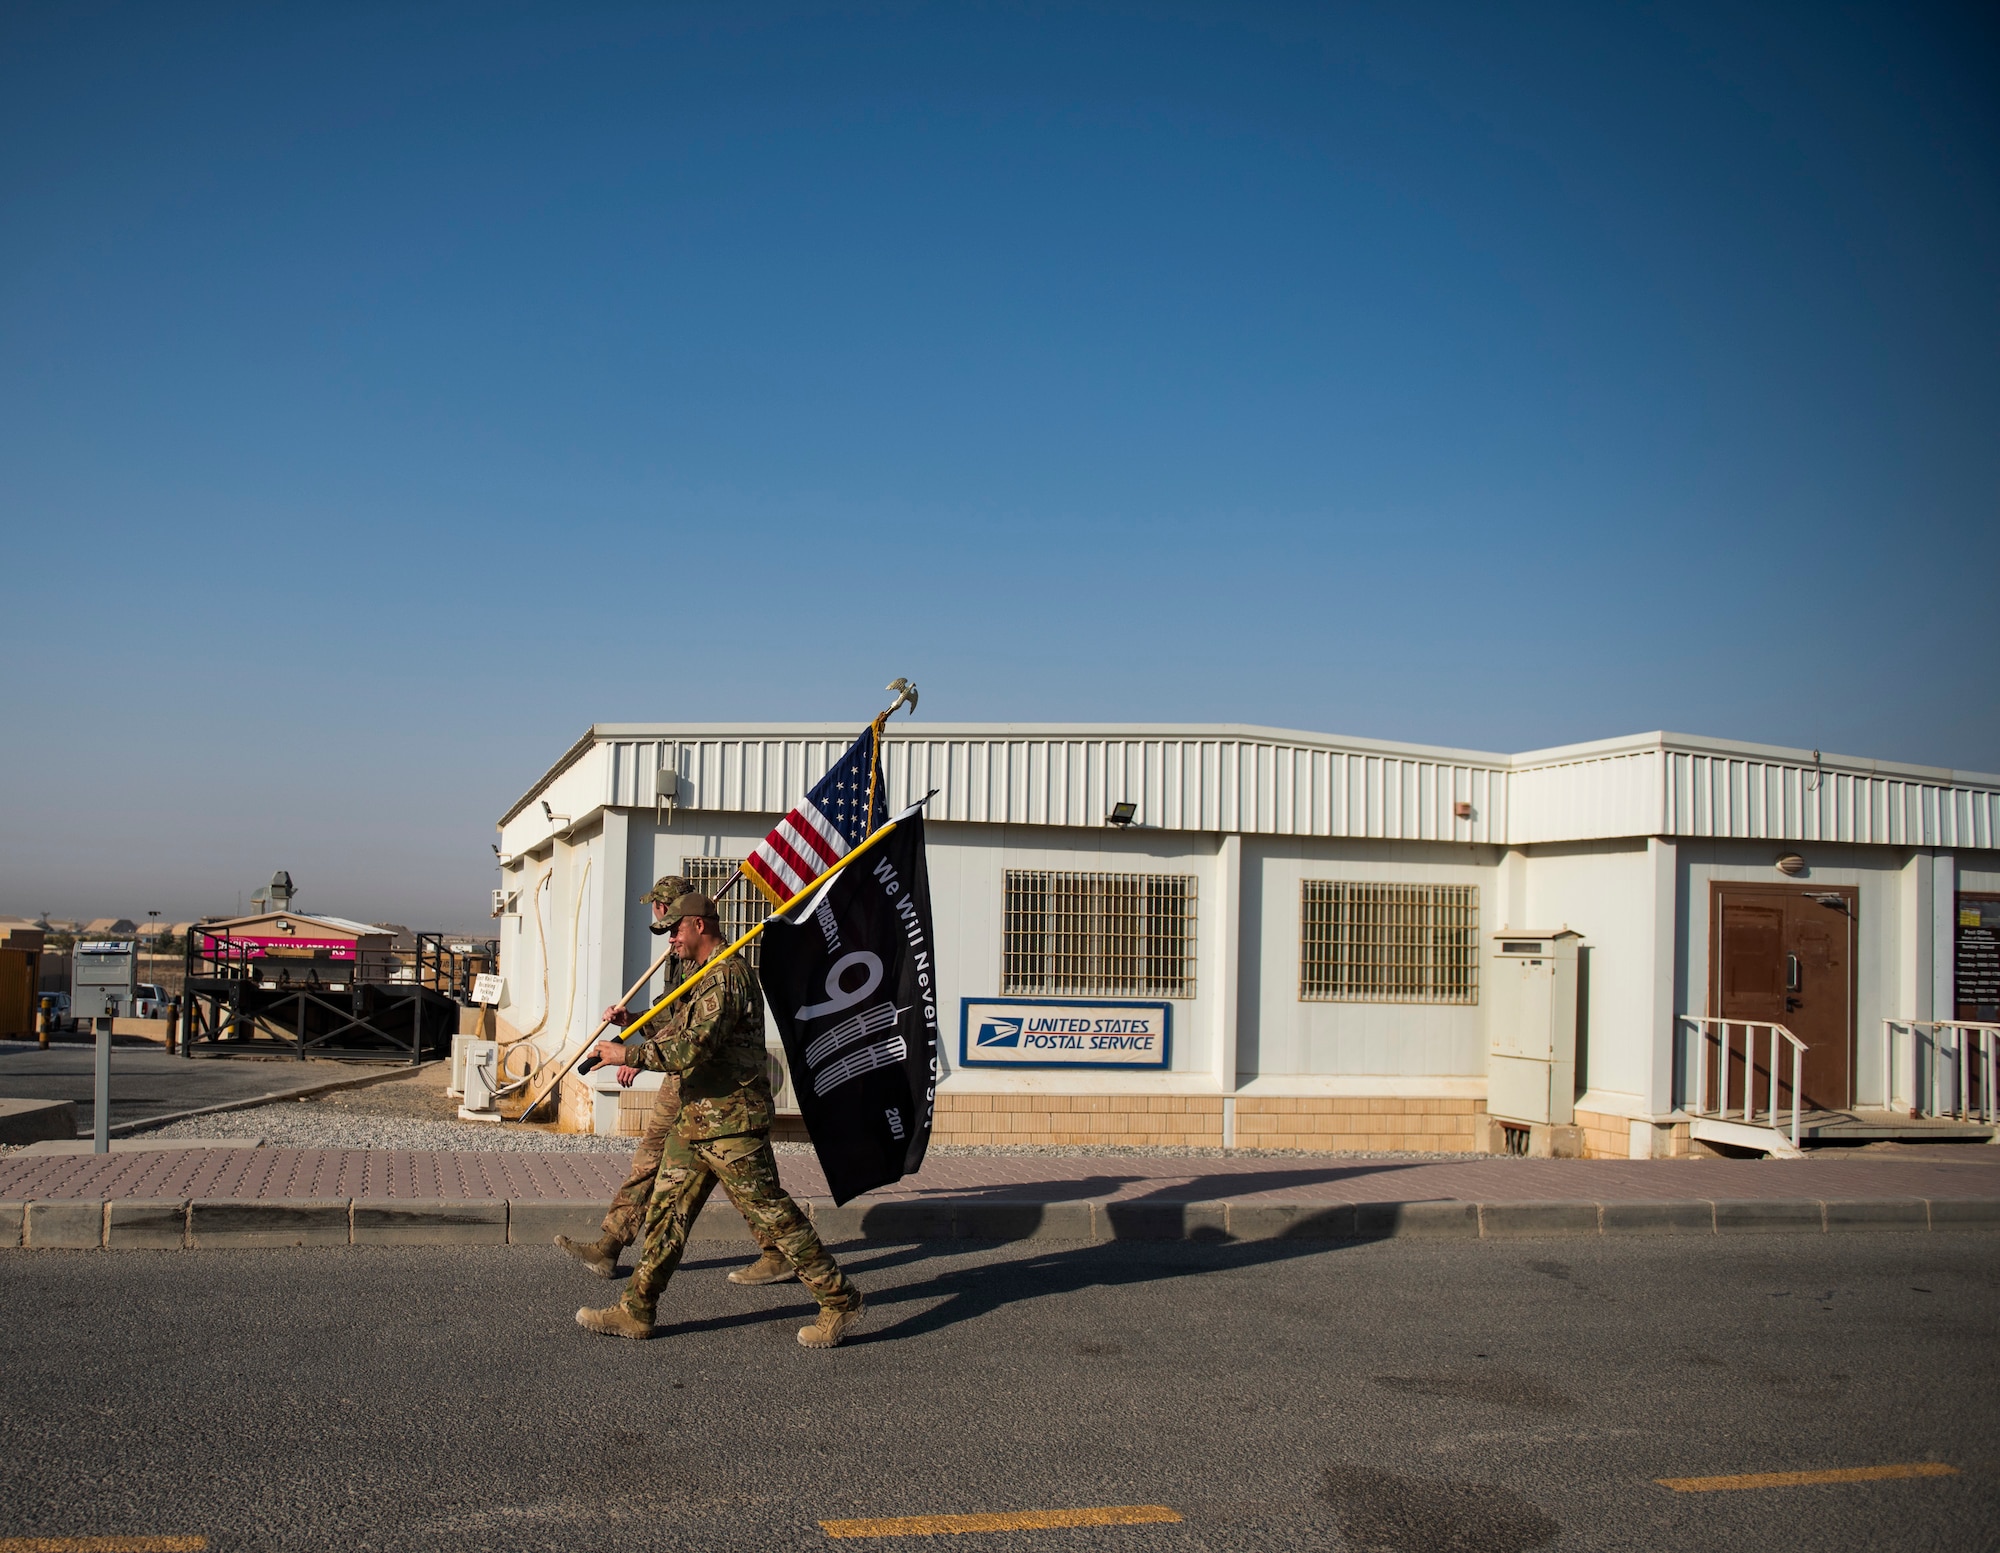 Staff Sgt. Aaron Watts, 386 Expeditionary Civil Engineer Squadron firefighter, marches along the side of a member of the 386 Expeditionary Security Forces Squadron at Ali Al Salem Air Base, Kuwaiti, 12 Sept. 2022 in remembrance of those lost on Sept. 11, 2001. Members from multiple branches of service and coalition teammates from throughout the world took part in the 24-hour march. (U.S. Air Force photo by Senior Master Sgt. David Salanitri)